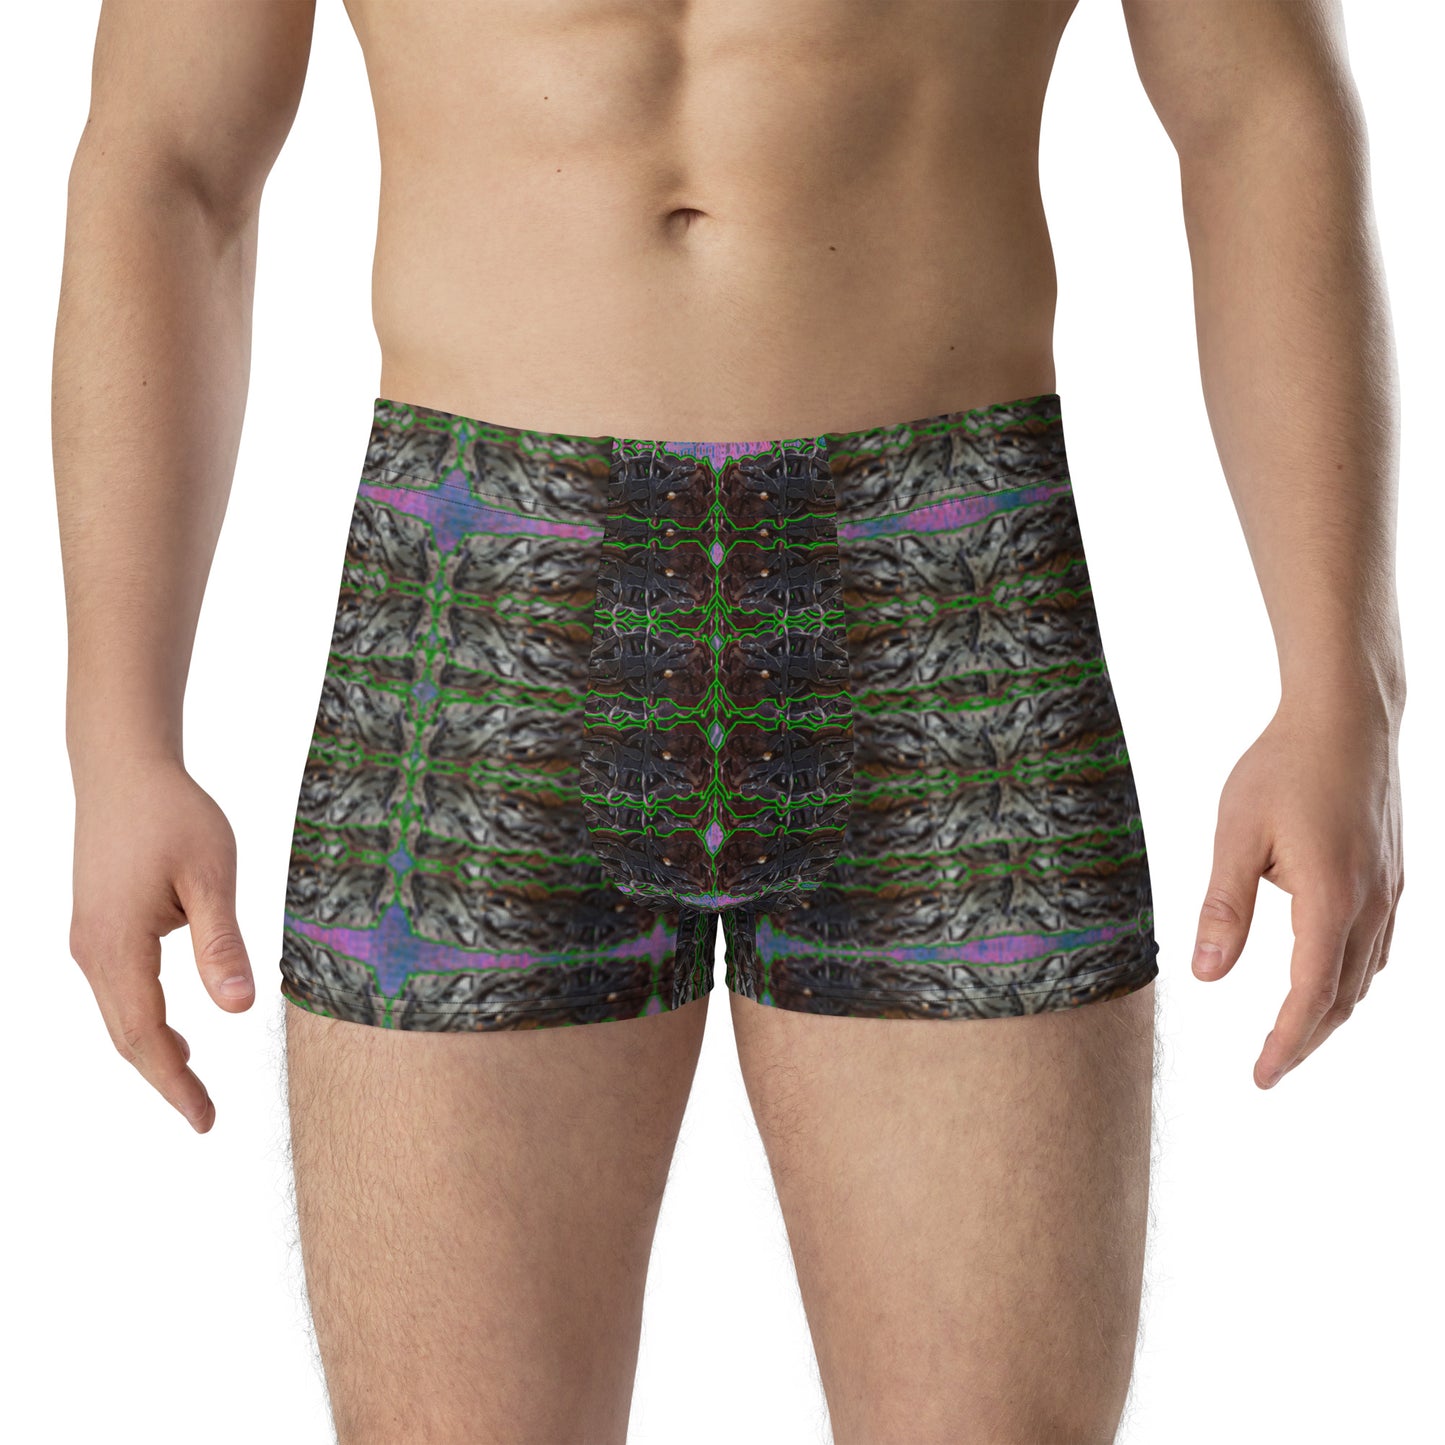 Boxer Briefs (His/They)(Rind#4 Tree Link) RJSTH@Fabric#4 RJSTHW2021 RJS